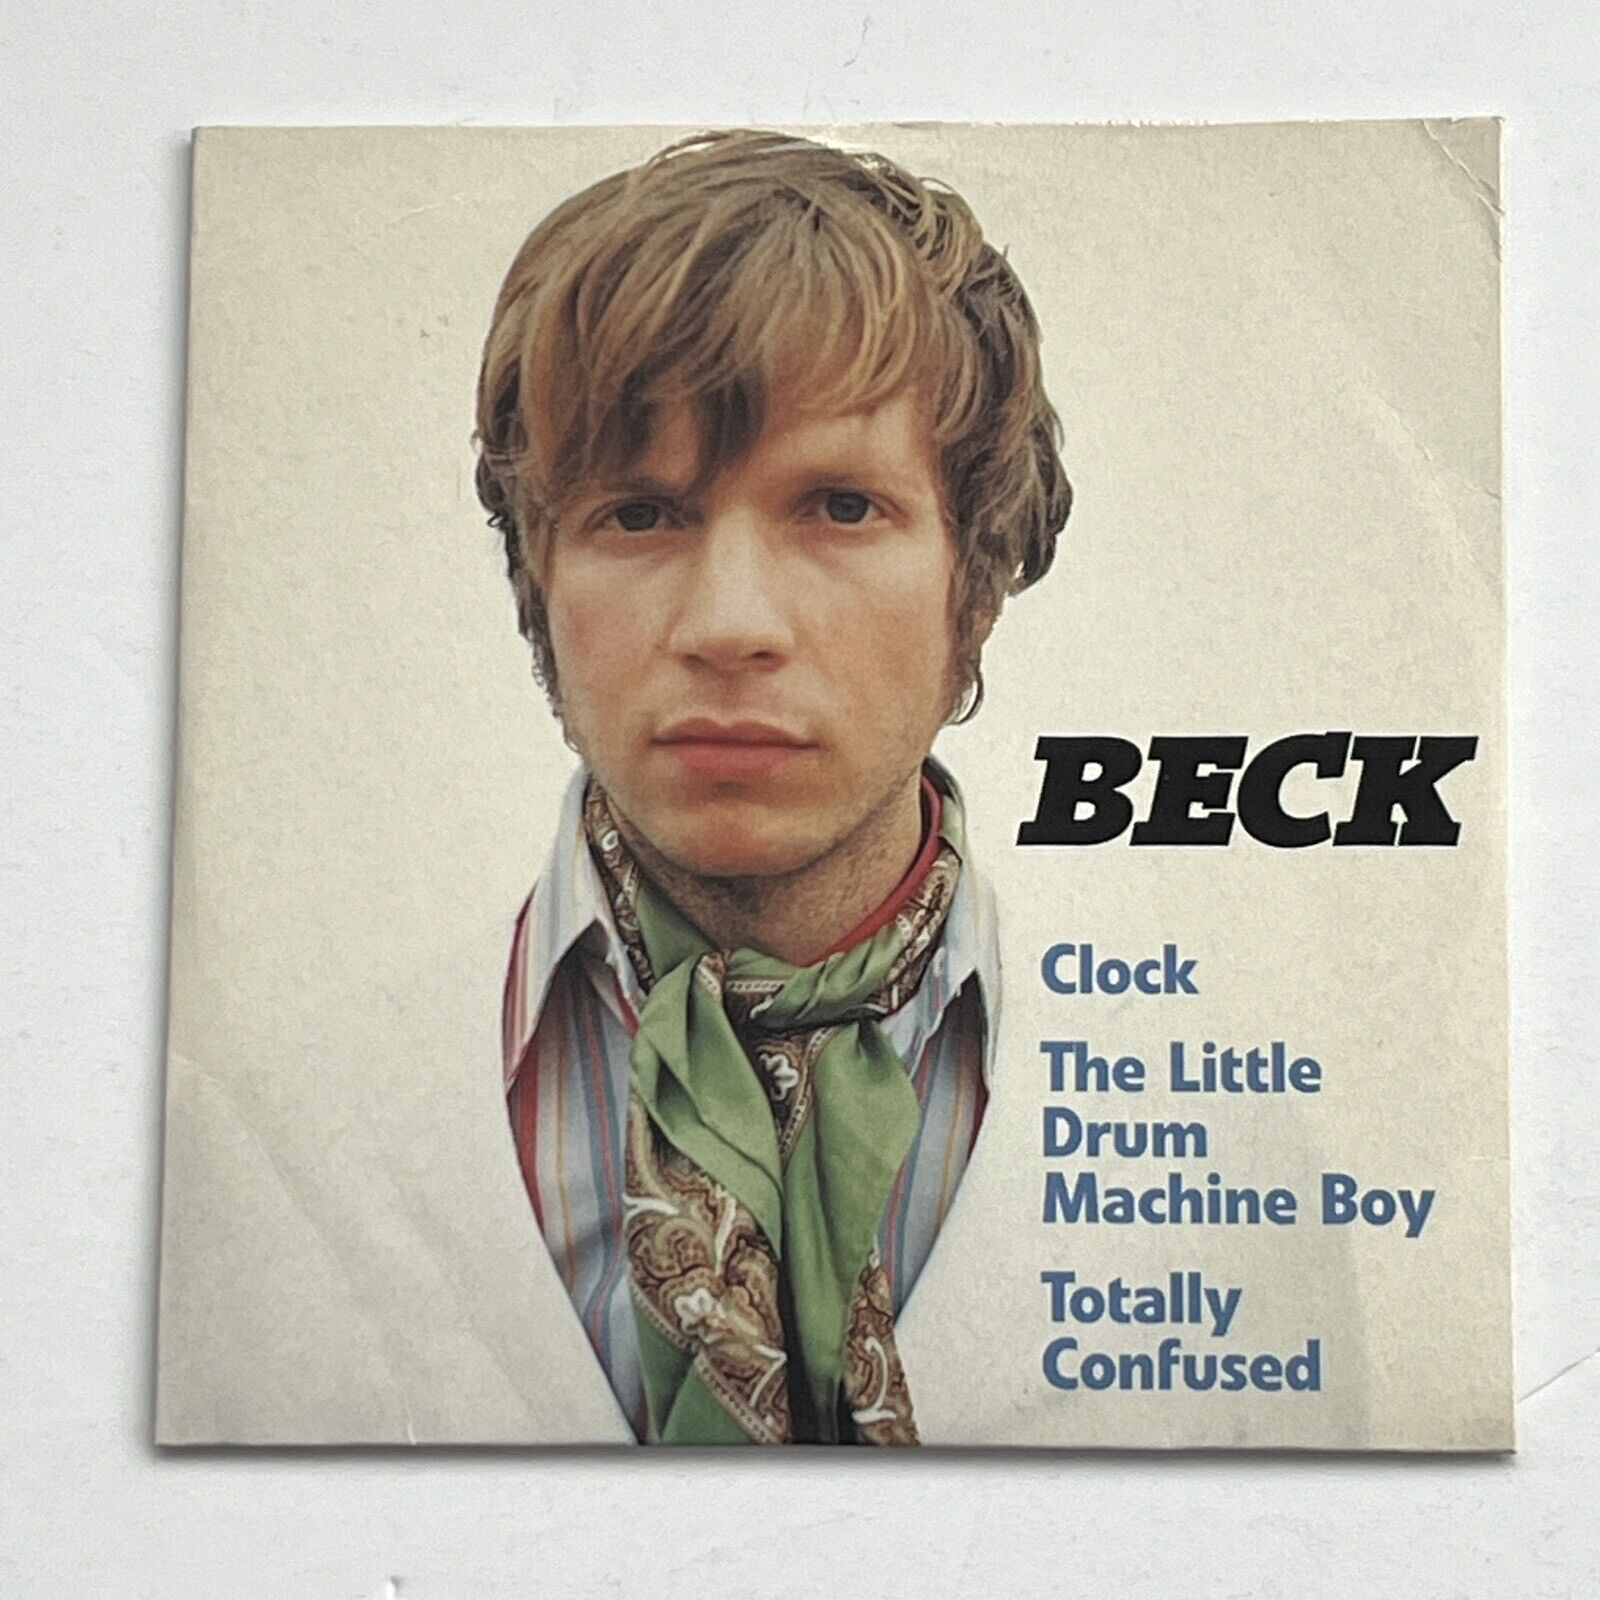 Beck : Select Promo CD - Clock / The Little Drum Machine Boy / Totally Confused